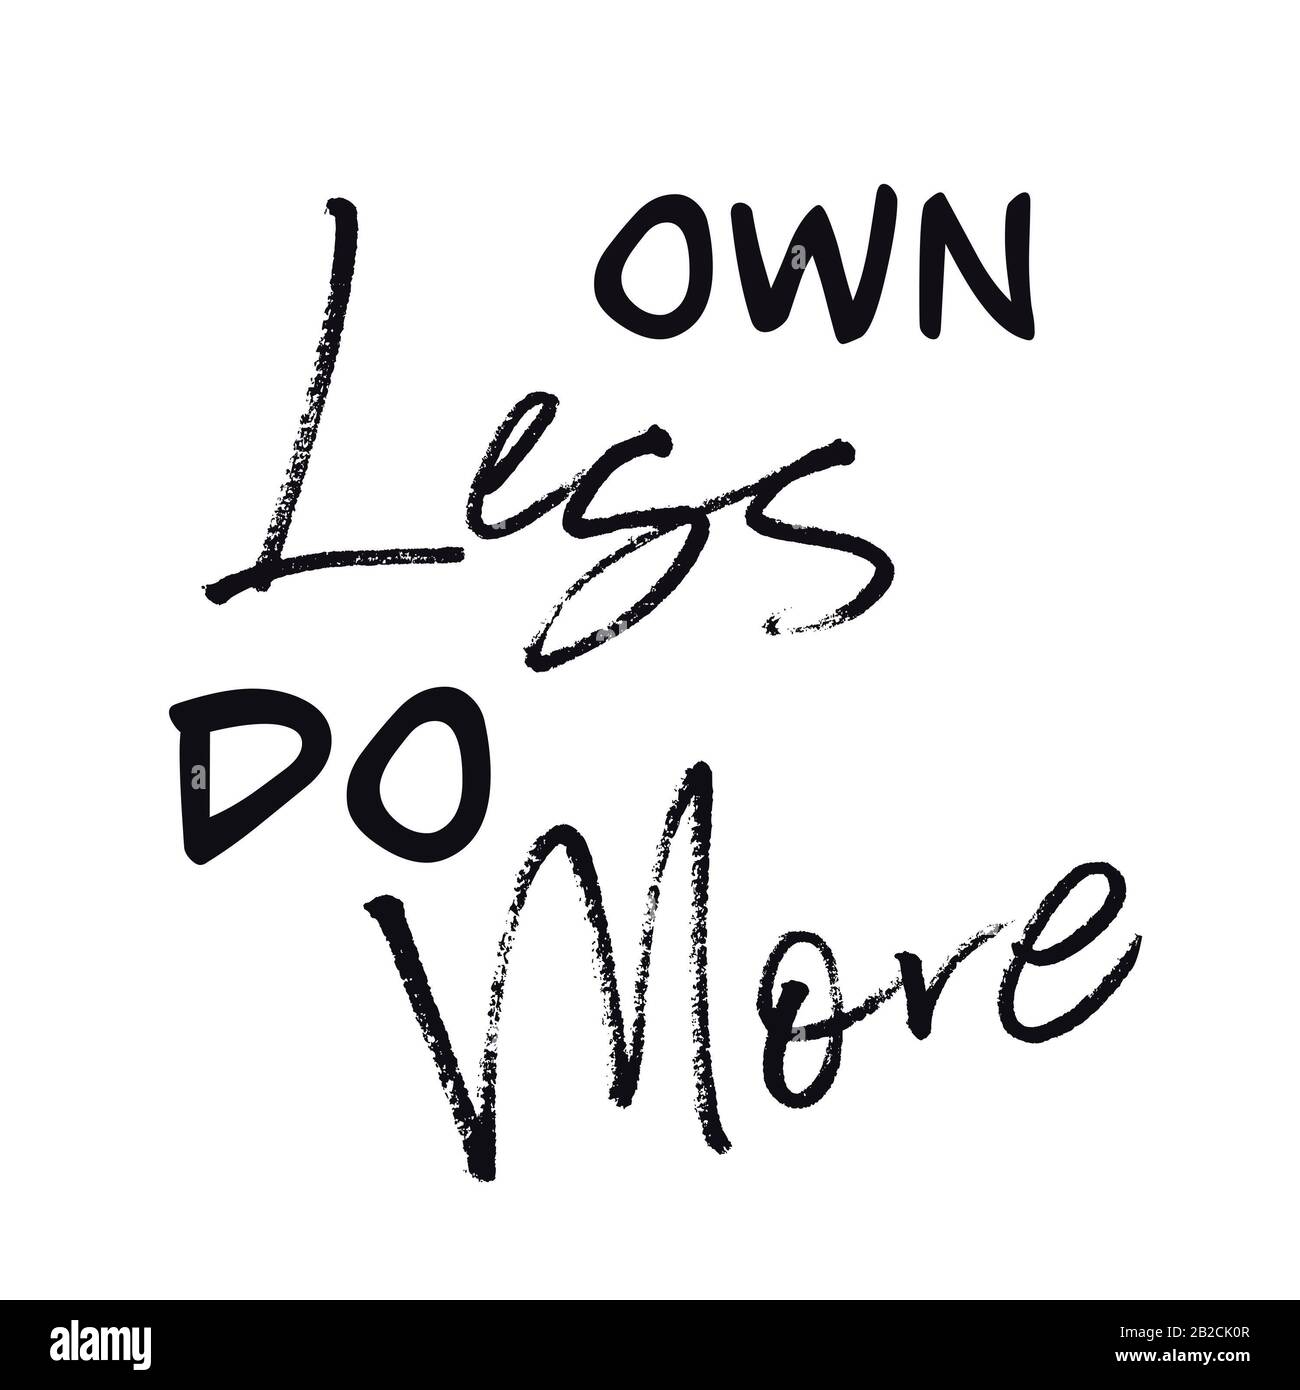 Inspirational Quote - Own less do More with white background Stock Photo